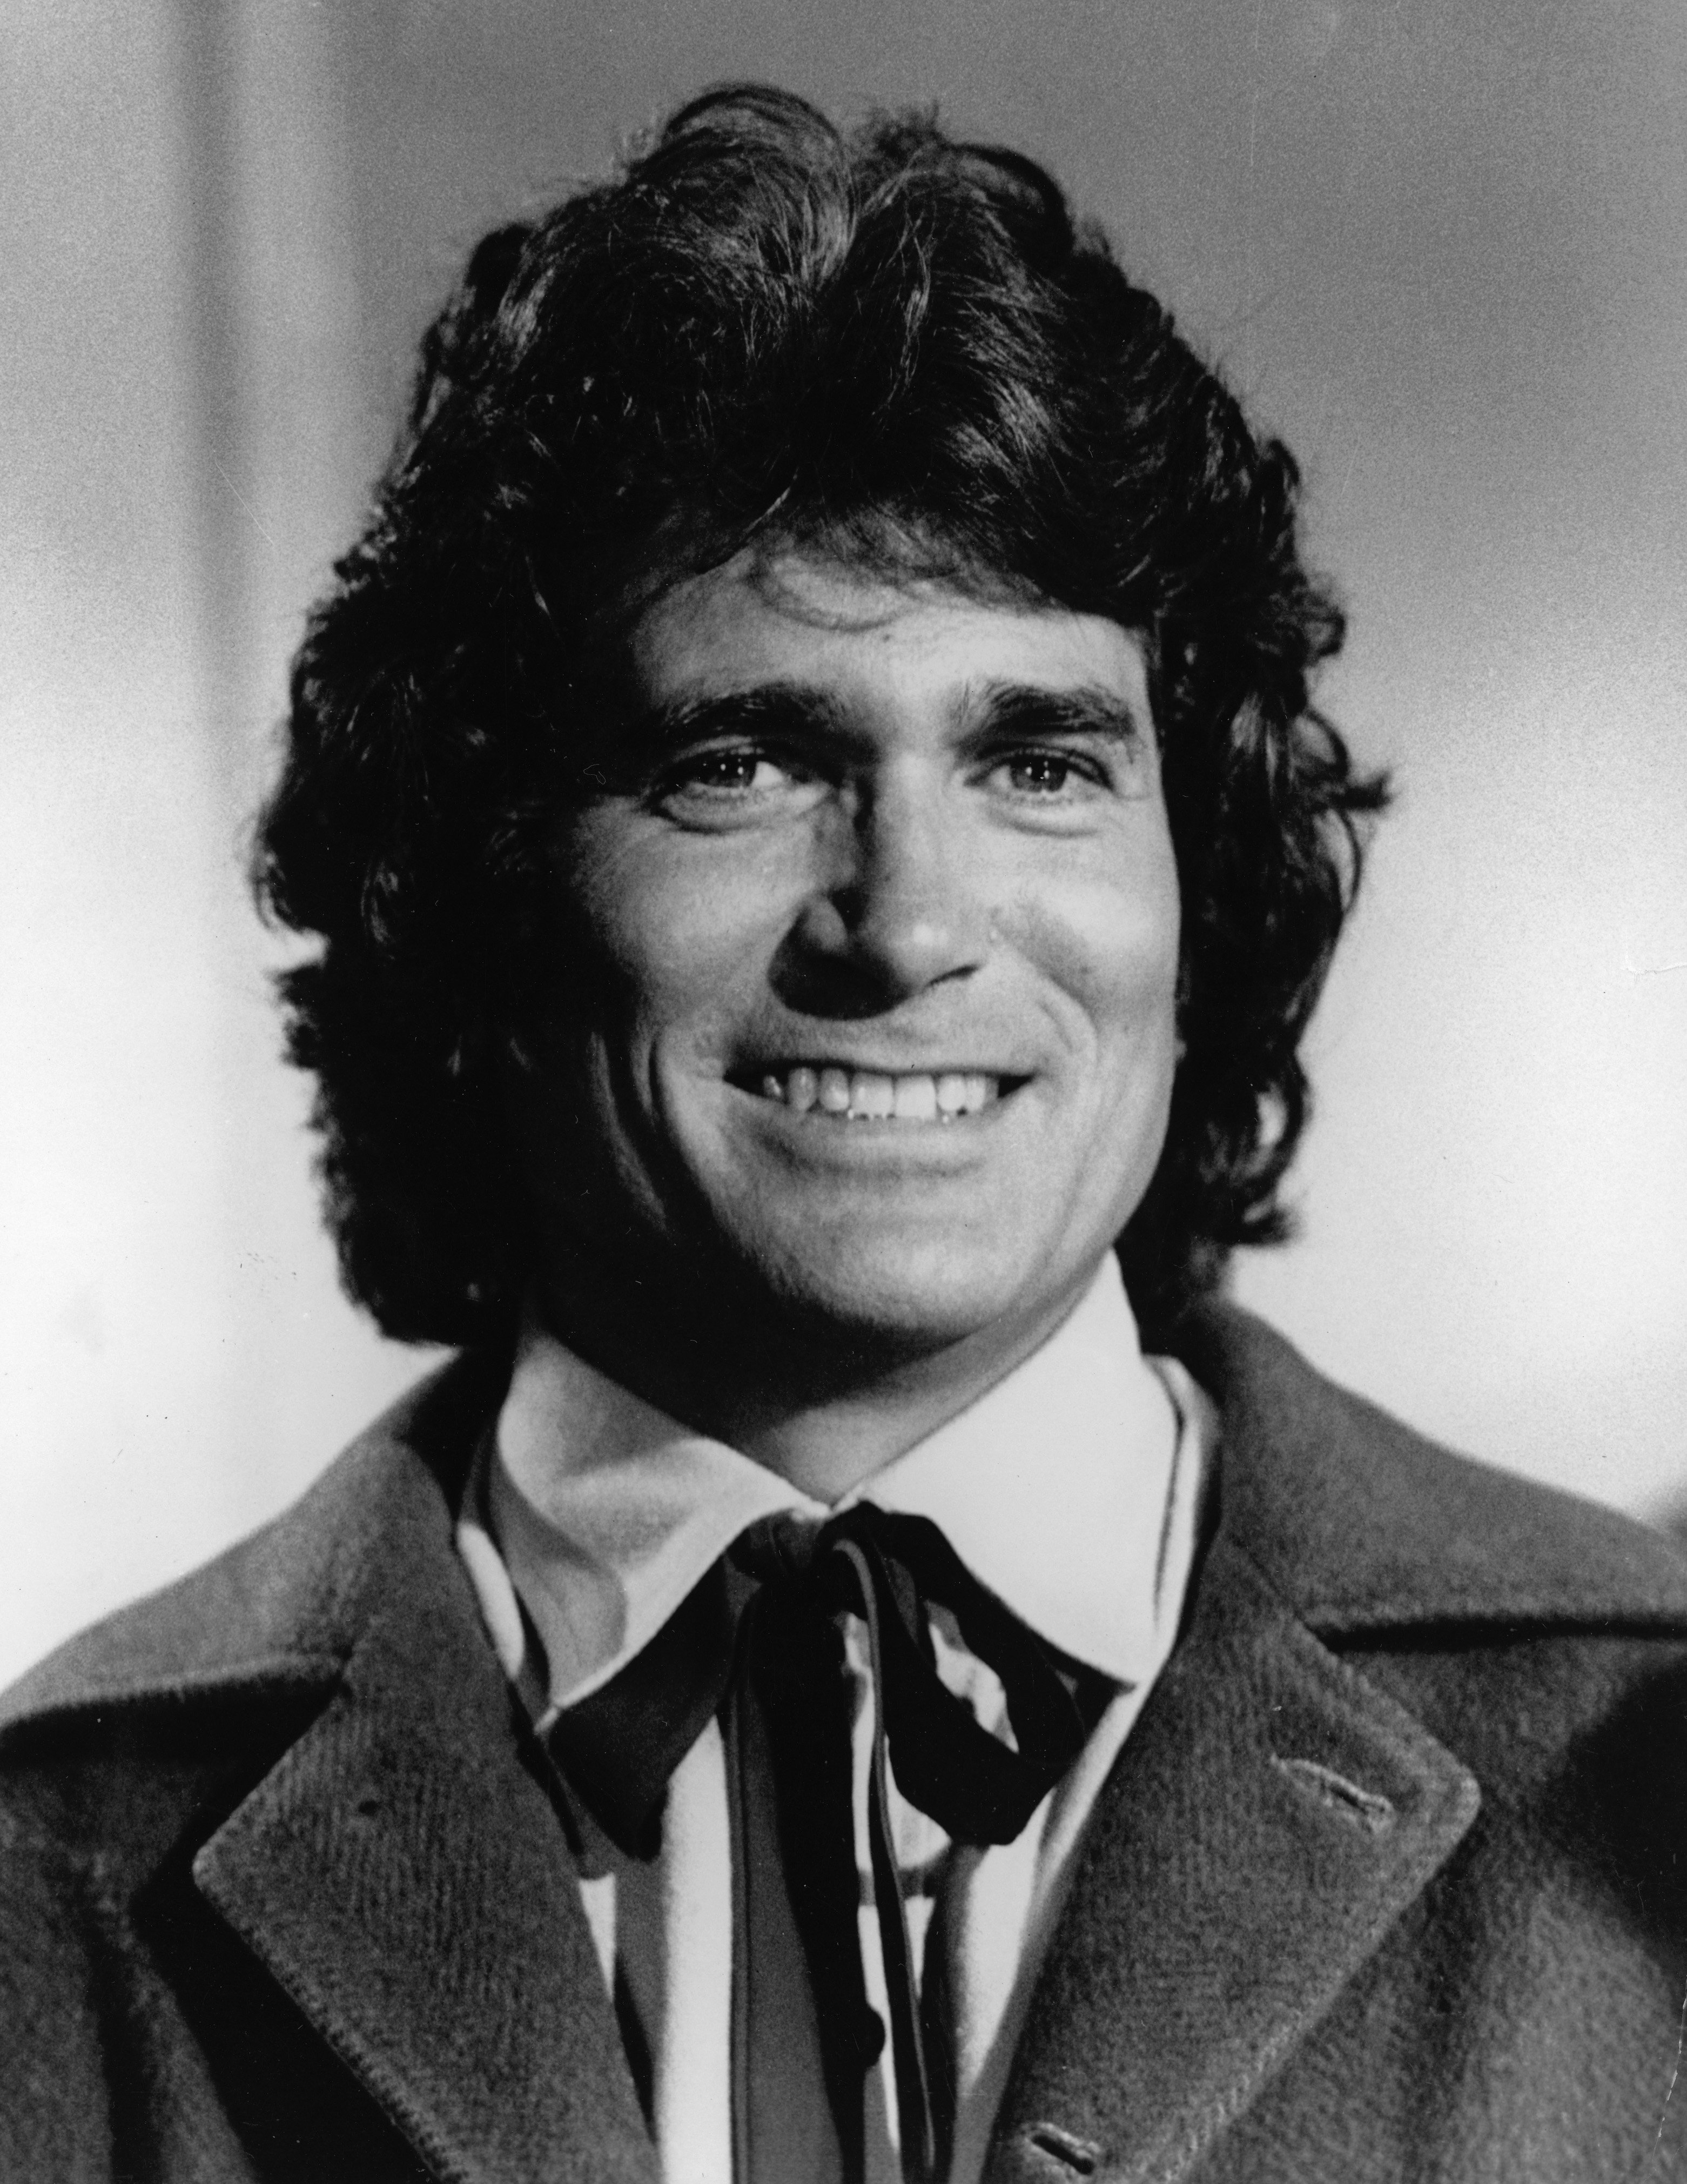 An undated headshot of filmmaker Michael Landon smiling in costume from the television series, "The Little House On The Prairie,'" | Photo: Getty Images